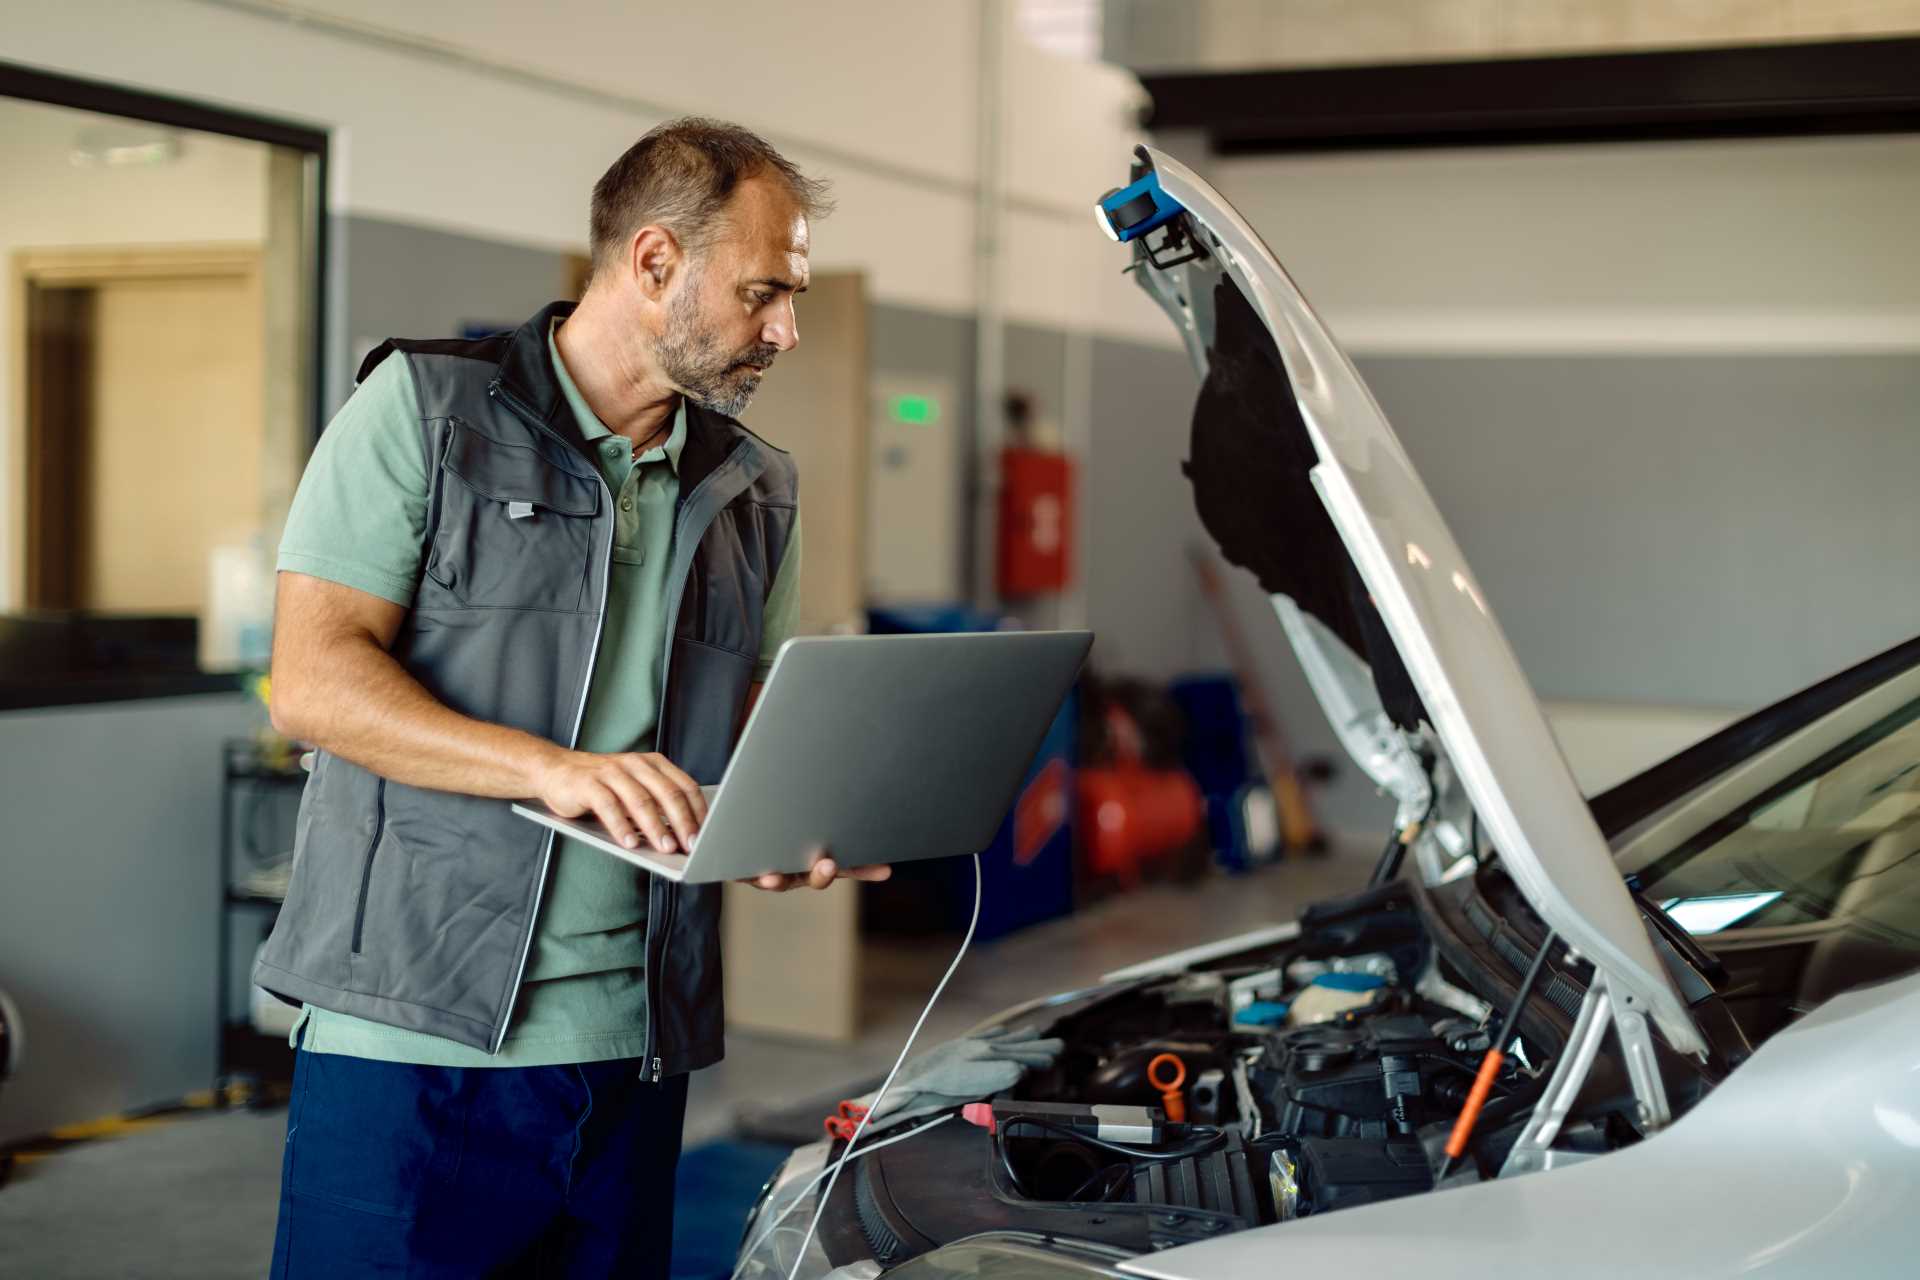 digital vehicle inspections, technician with laptop inspecting car